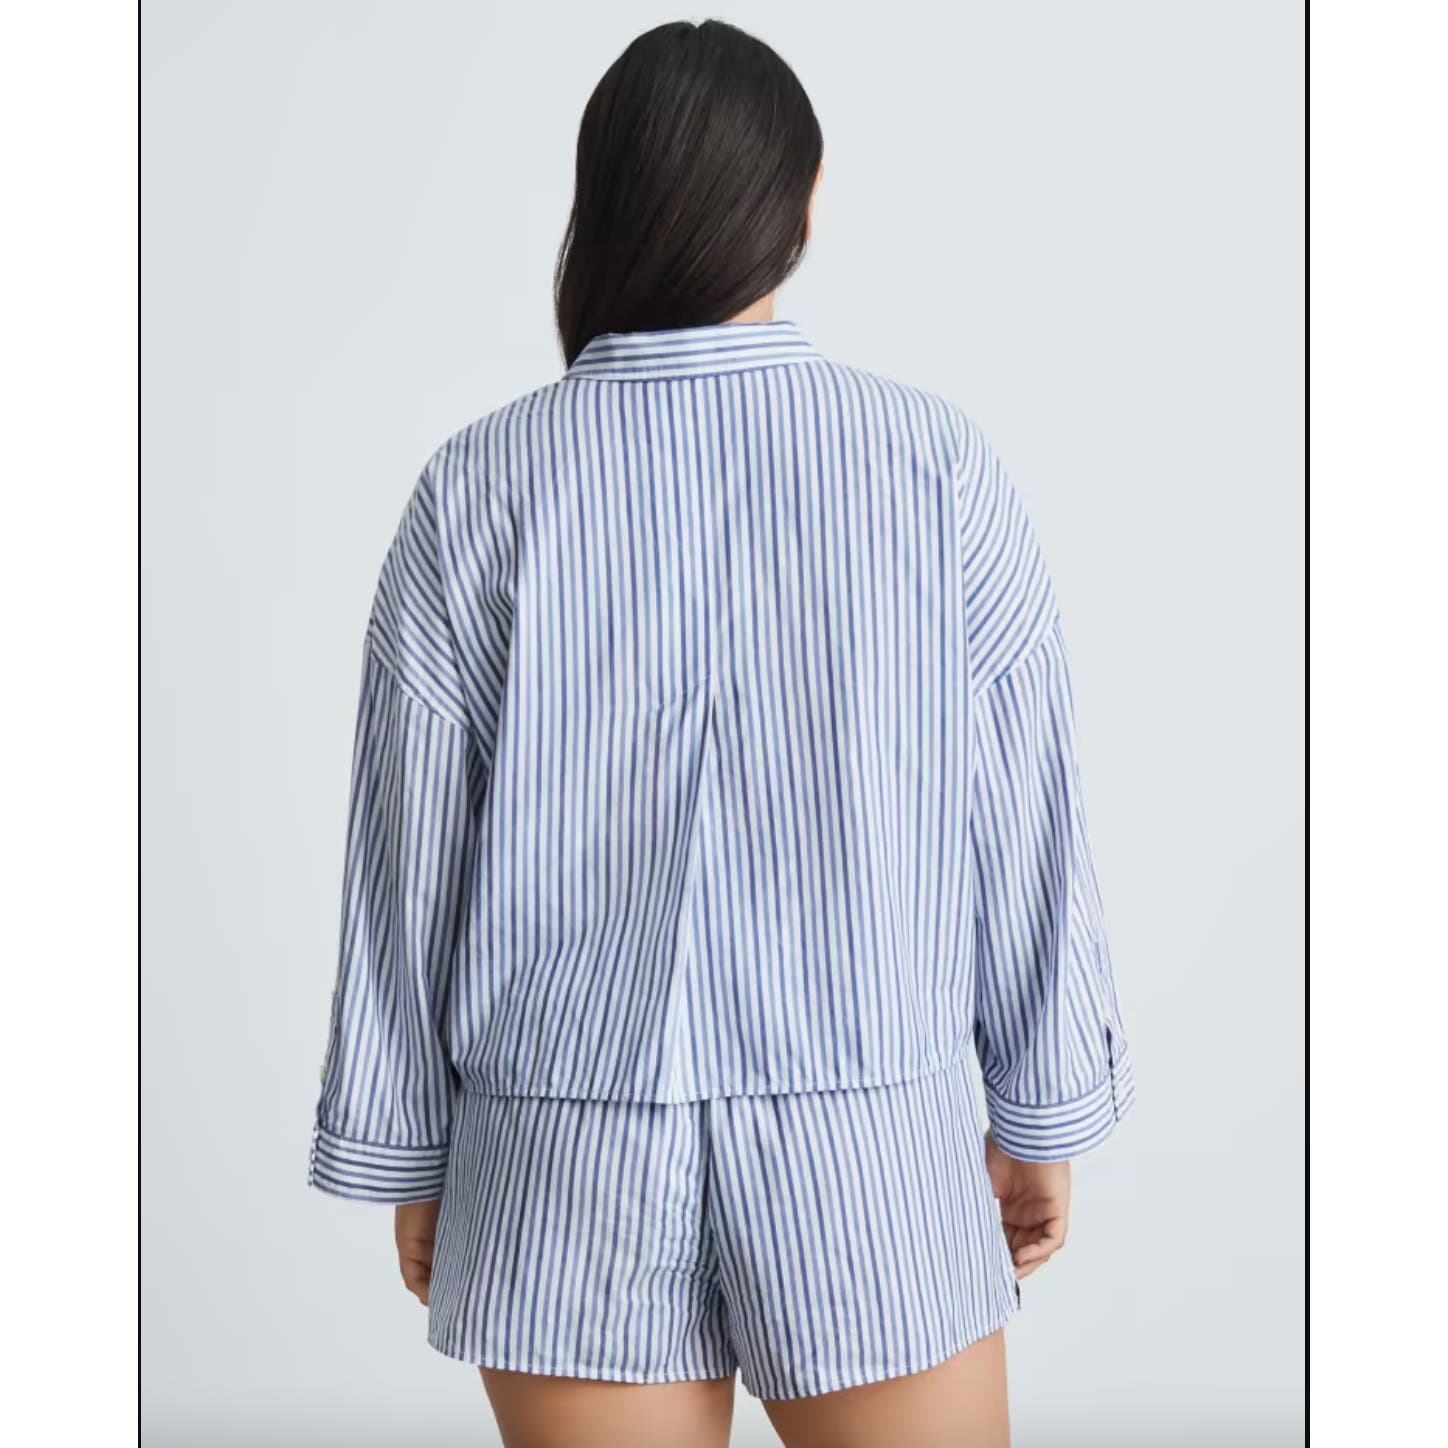 Everlane NWT The Woven P.J. Longsleeve Button Front Striped Top Blue White Size Medium